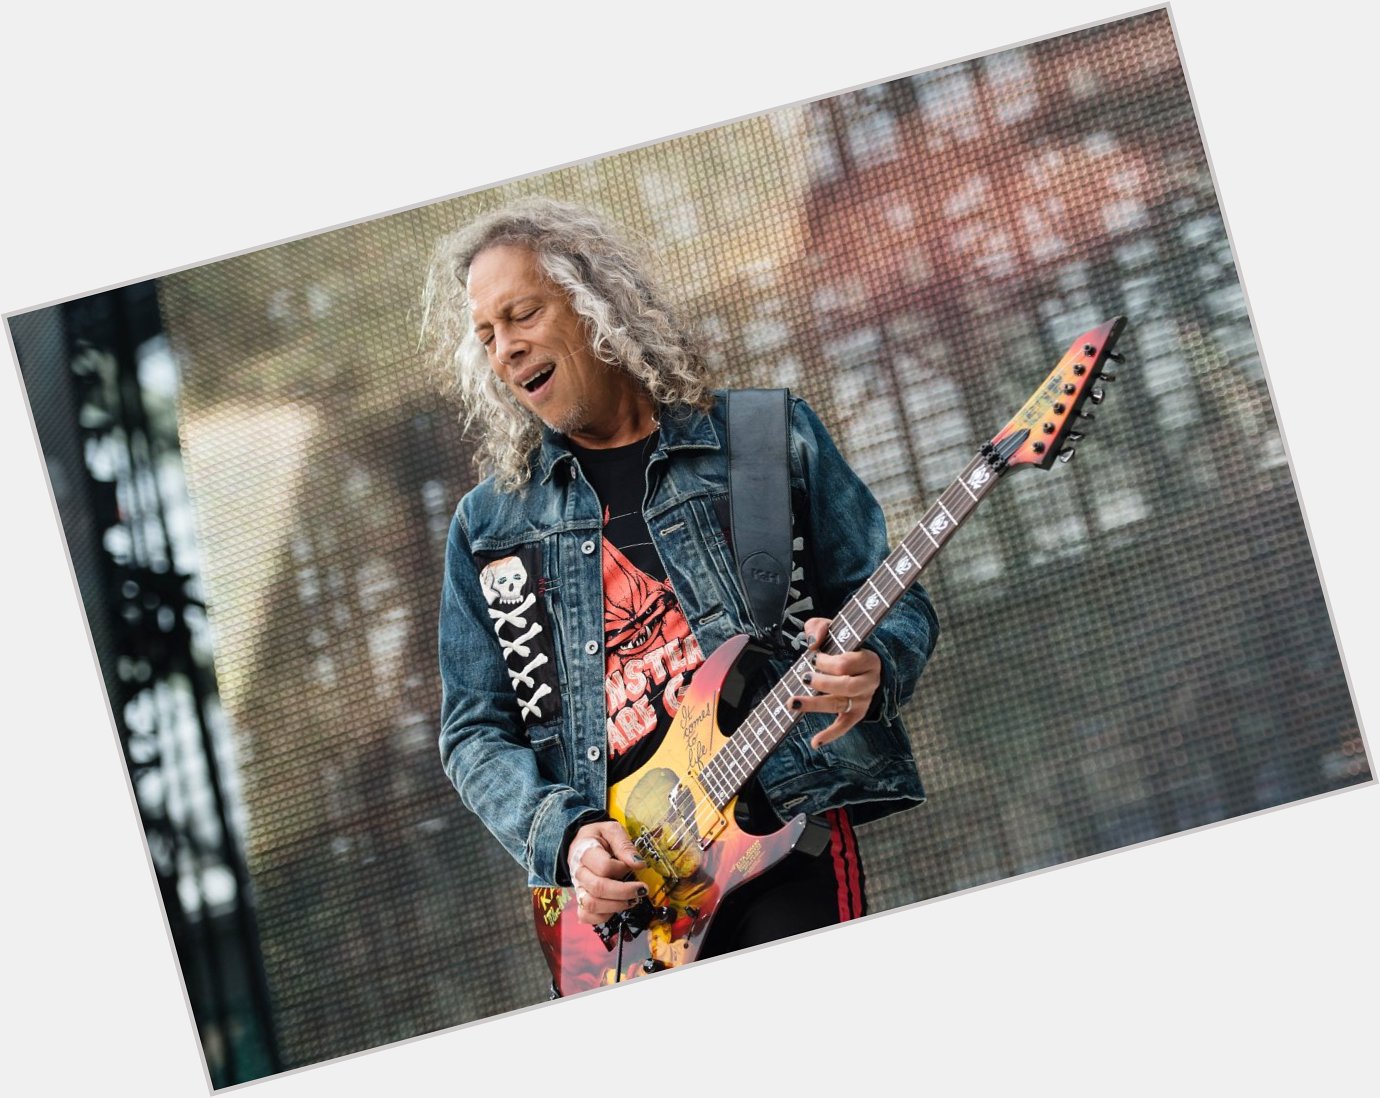 Please join us here at in wishing the one and only Kirk Hammett a very Happy 58th Birthday today  